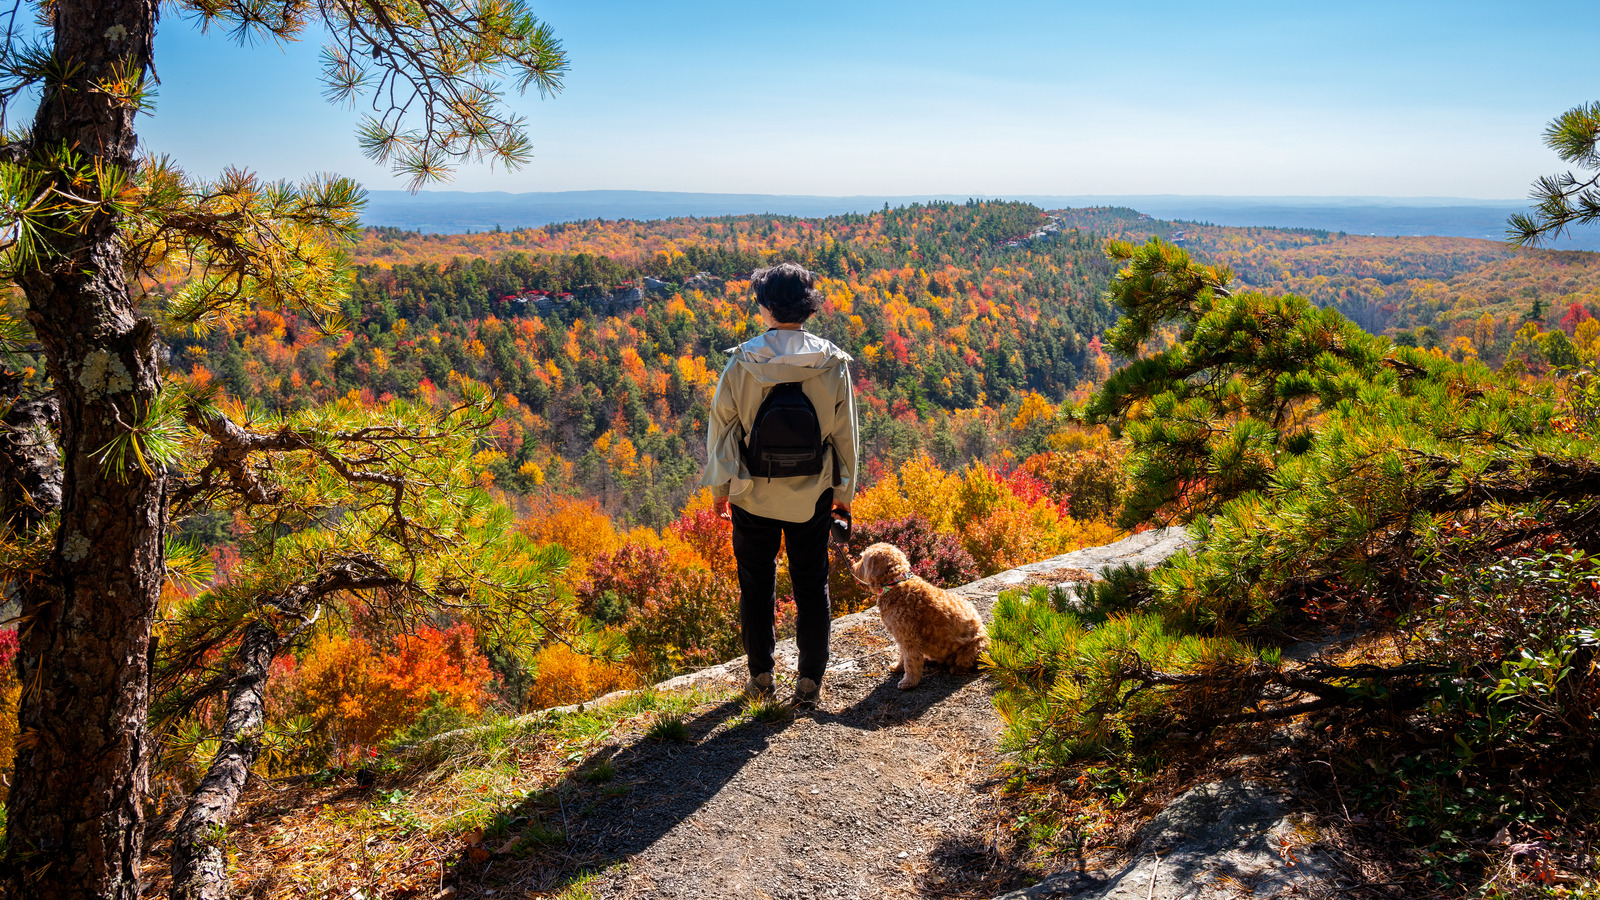 The 15 Best Hiking Trails in the U.S.